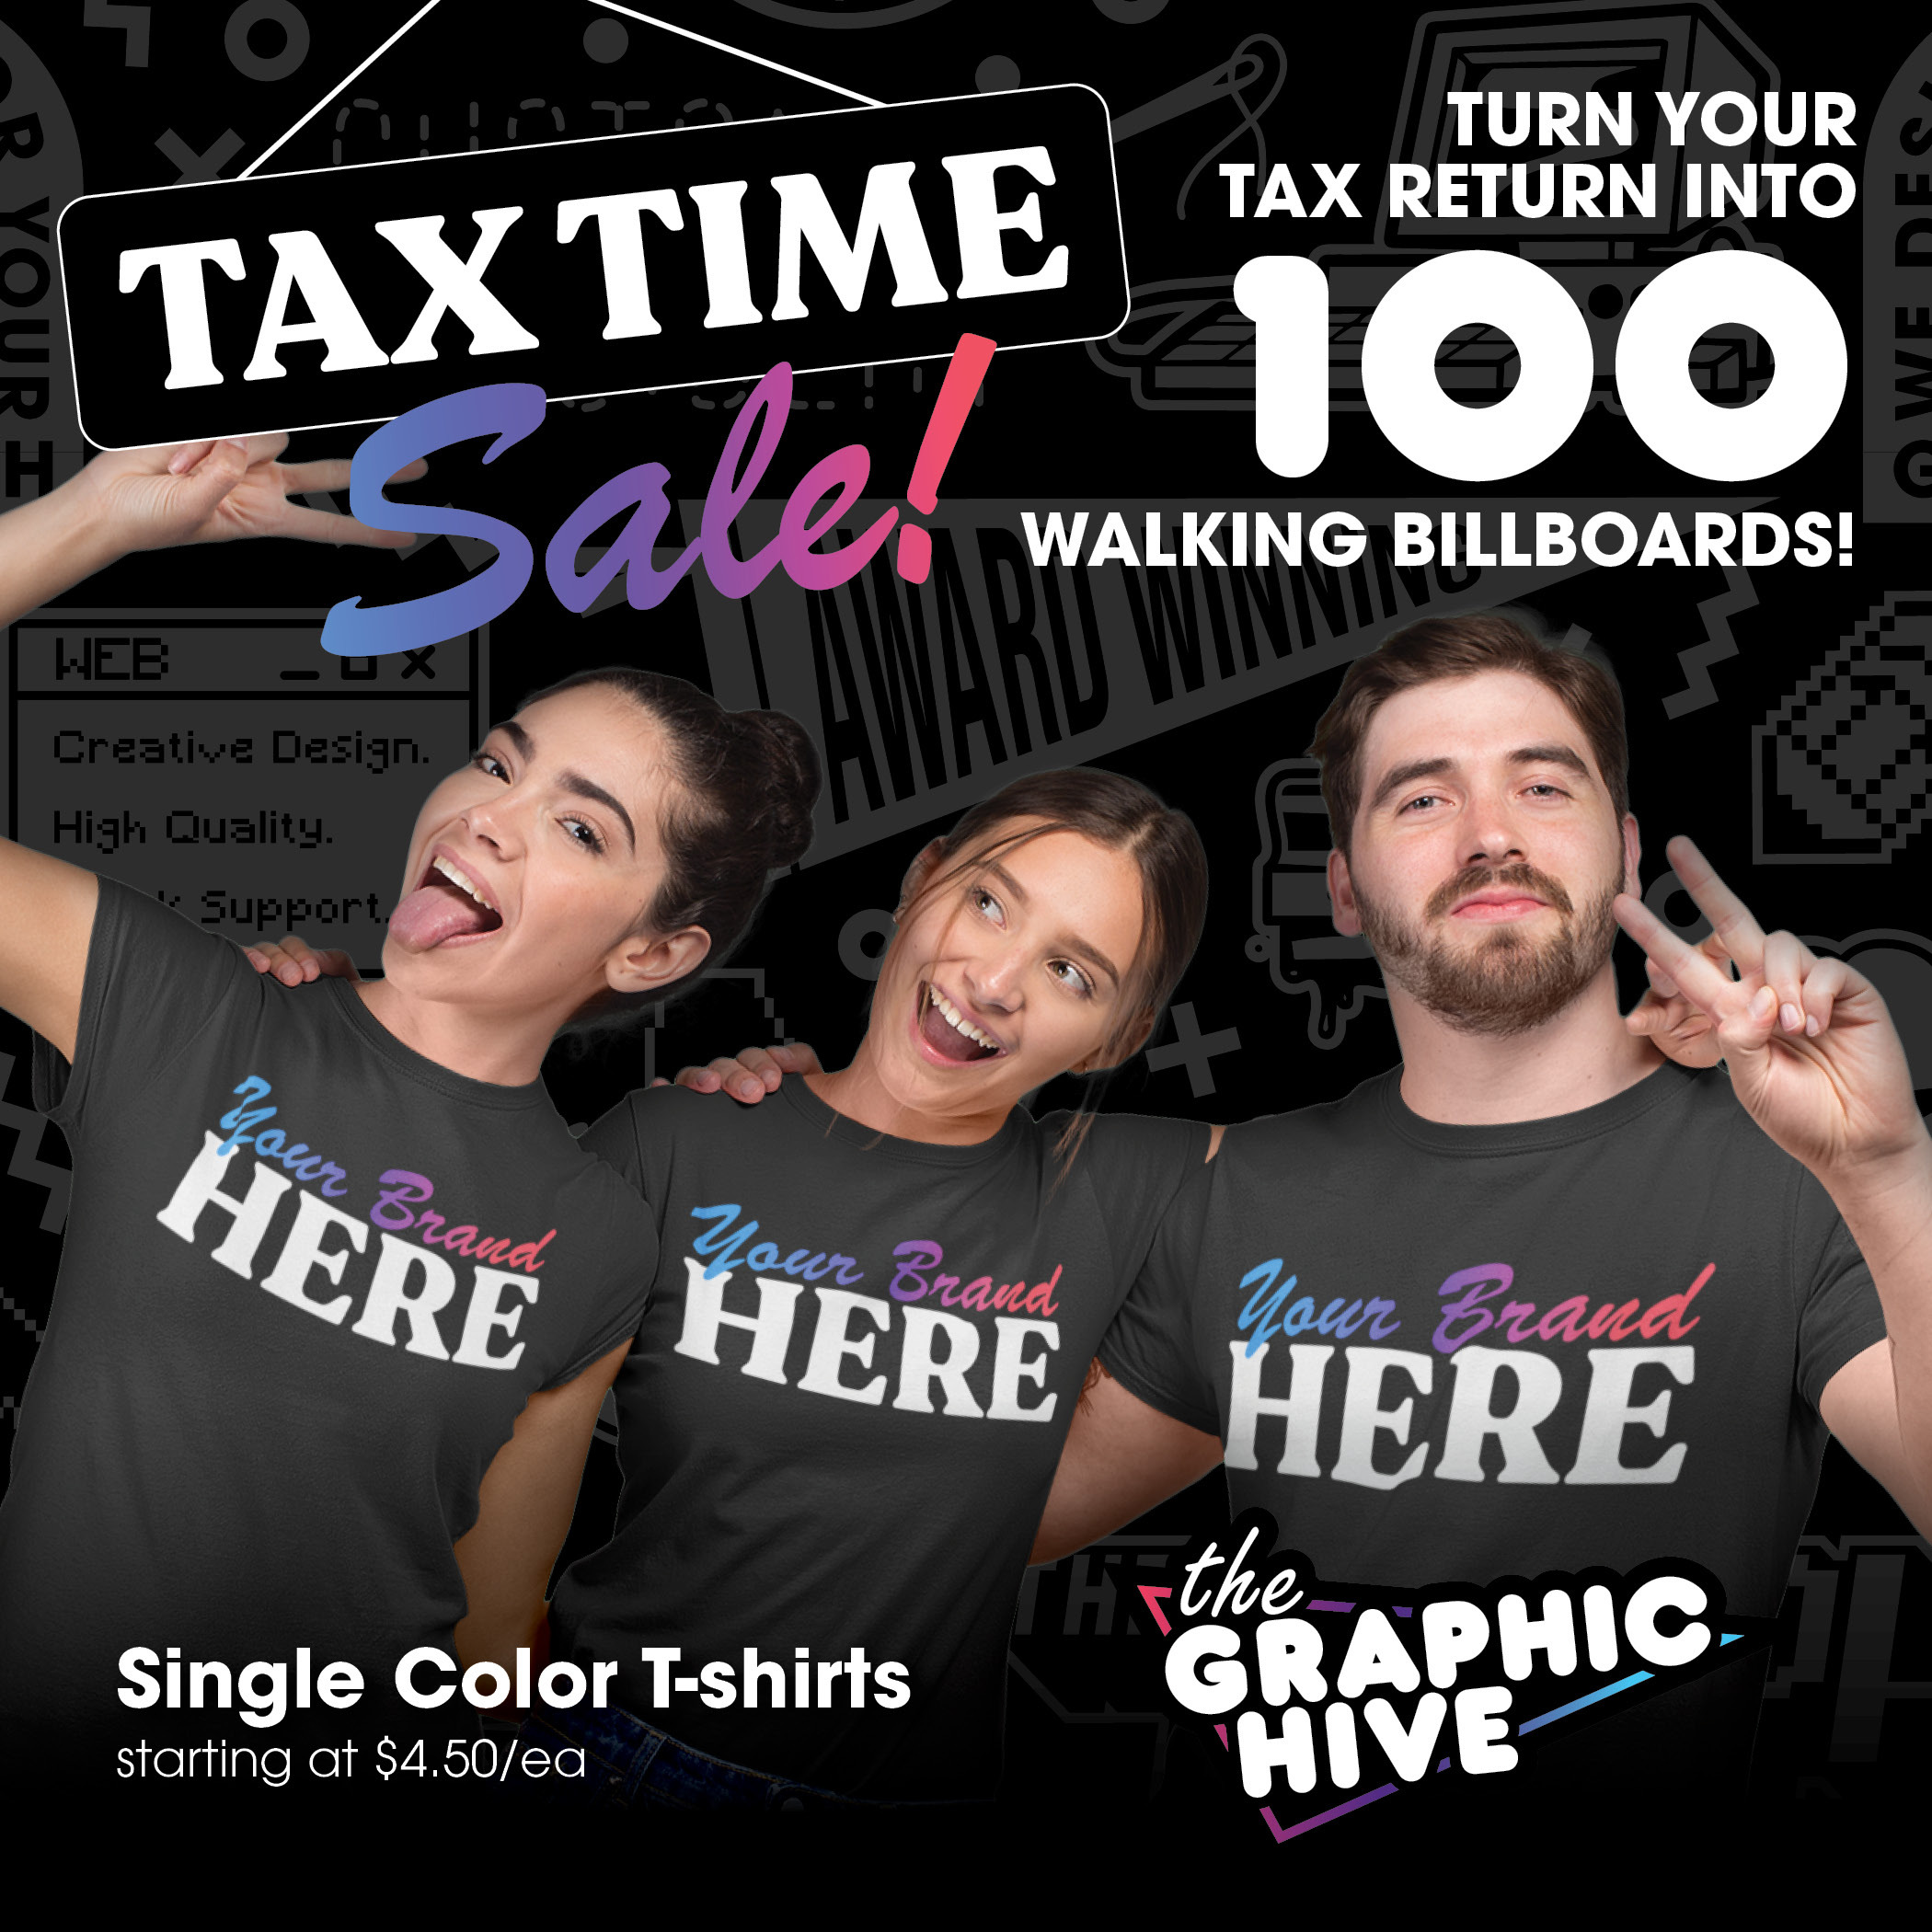 Tax Time Sale_GHIVE_021523